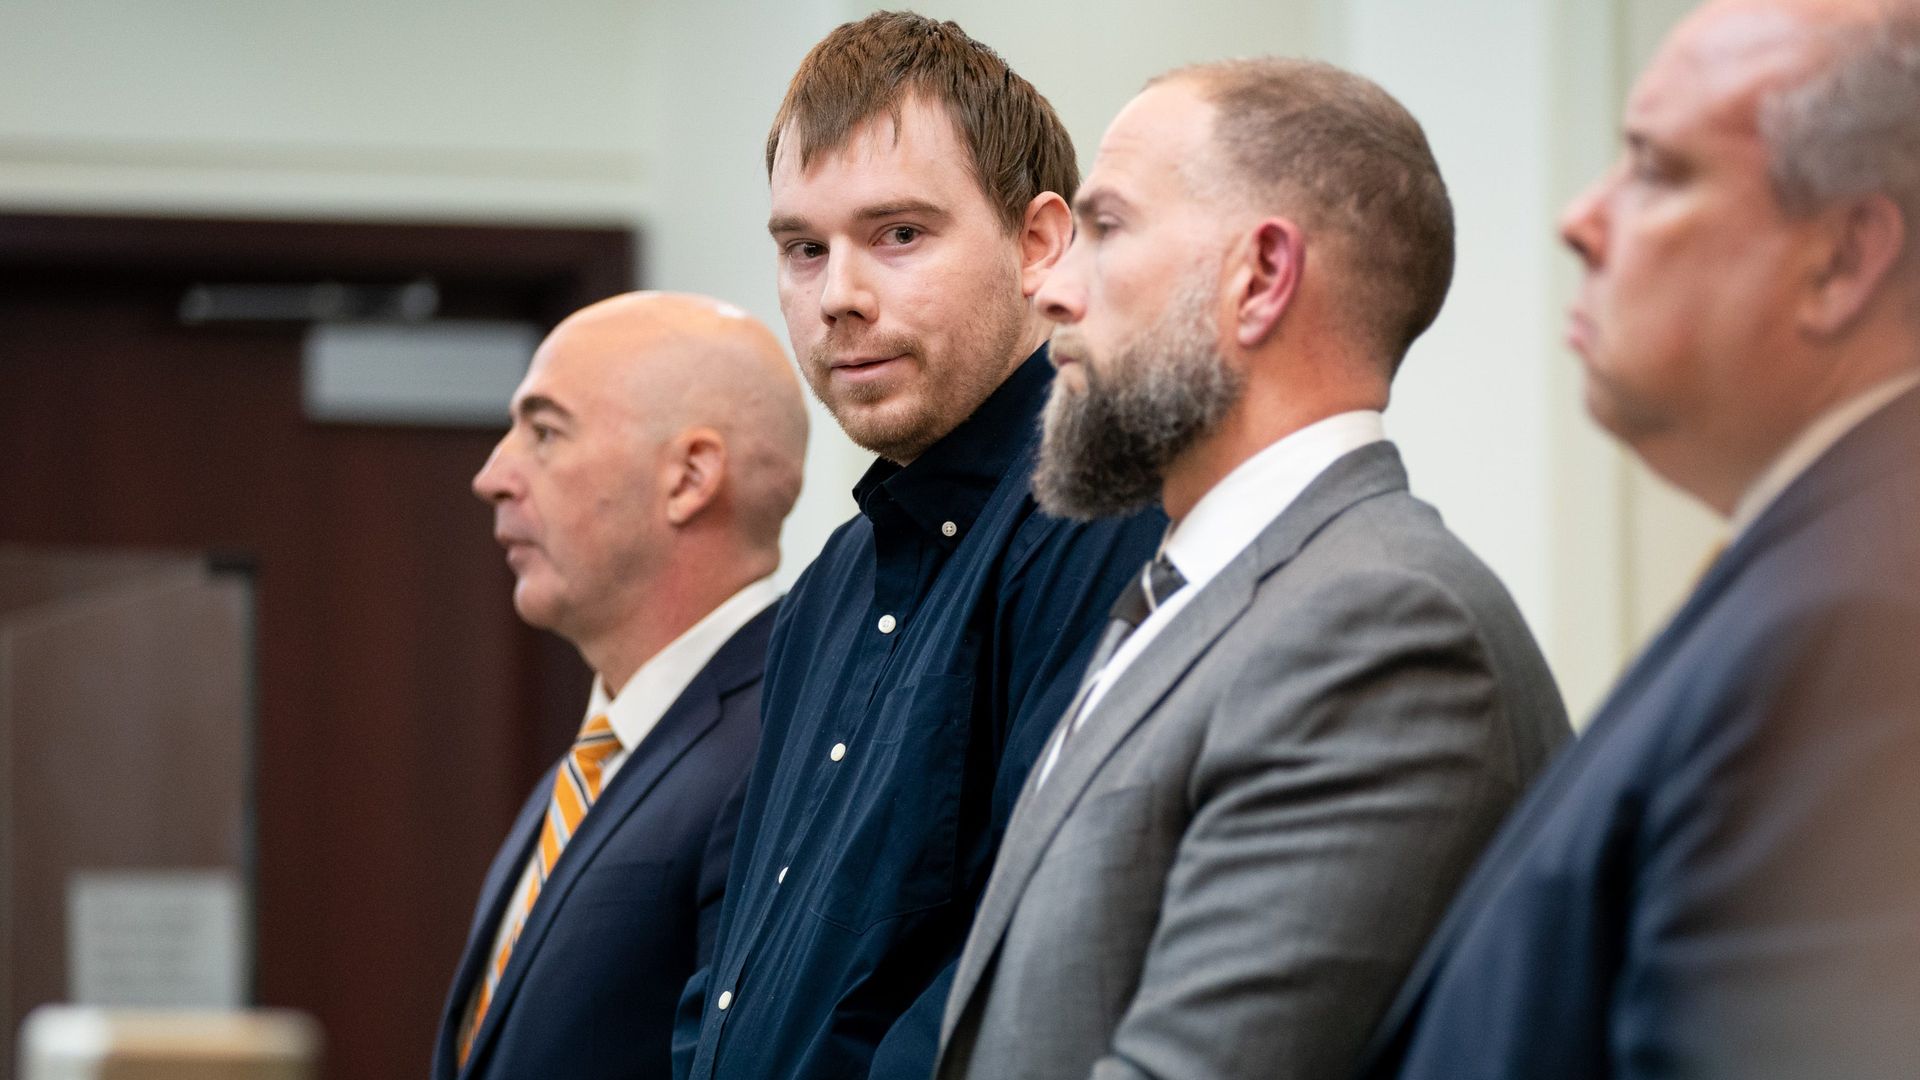 Travis Reinking reacts to the verdict. Photo: Andrew Nelles/The Tennessean/USA Today Network